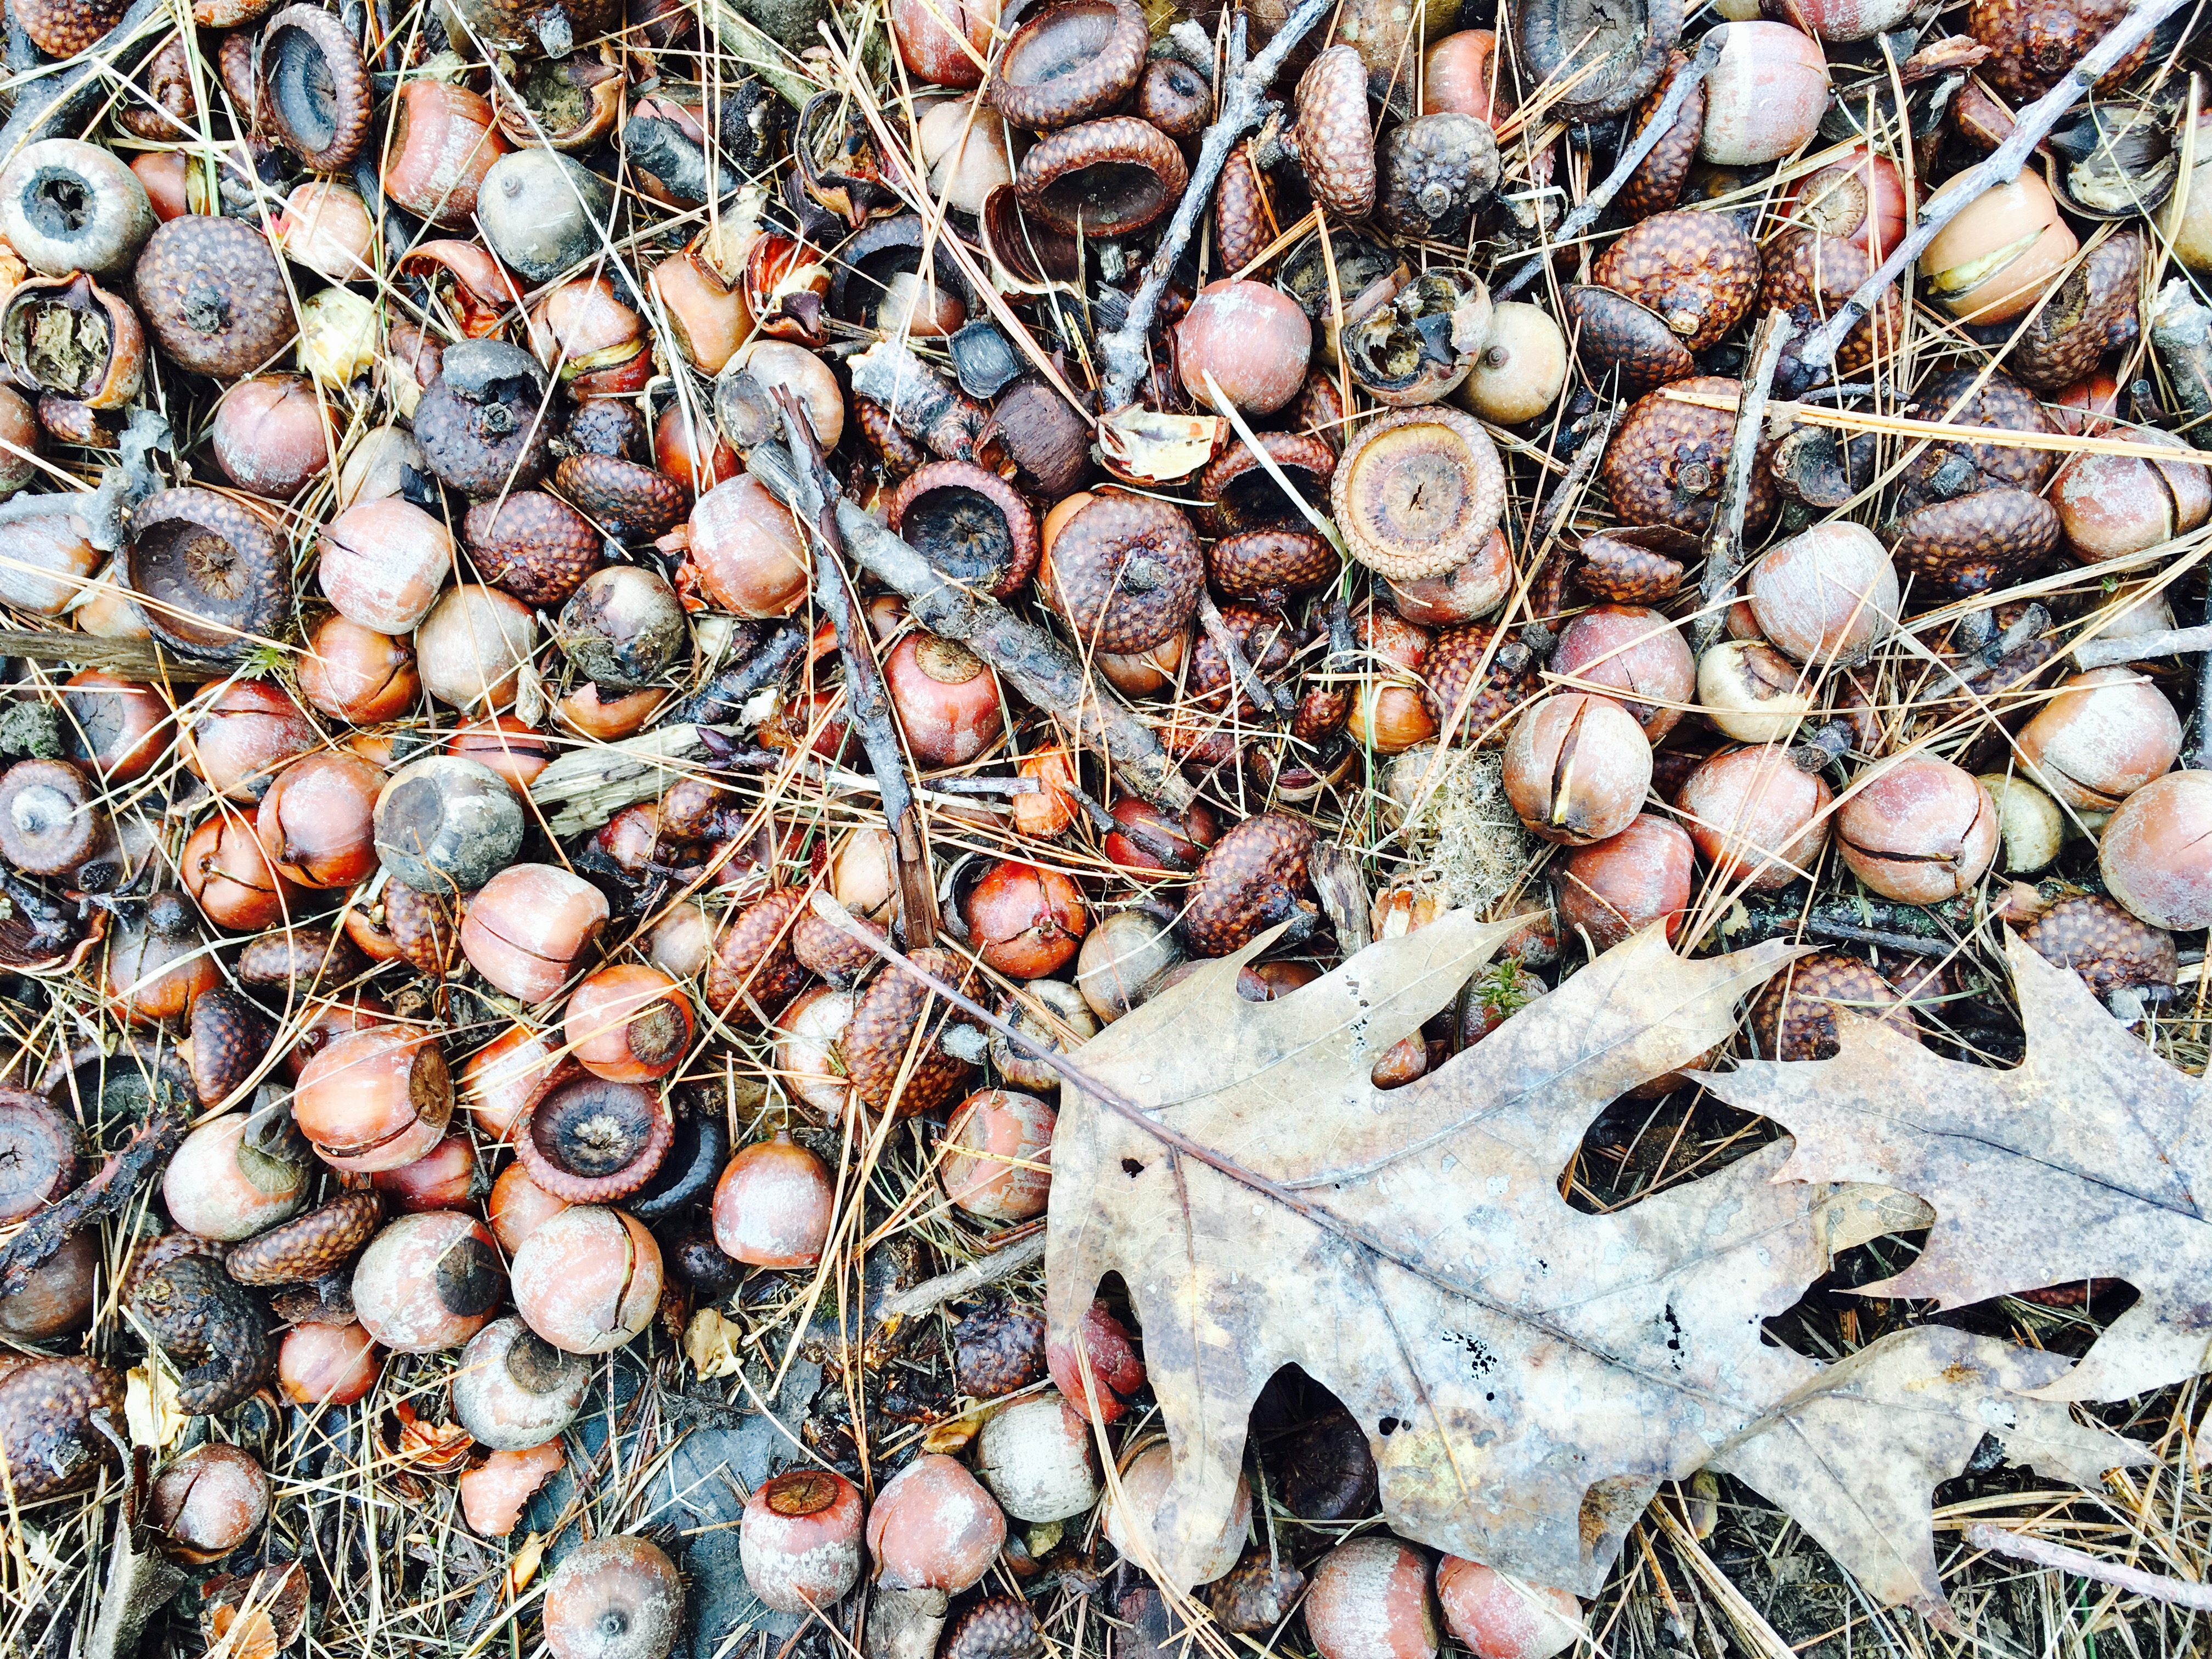 Acorns are a favorite deer food. Reforestation has provided deer with ideal habitat and food.